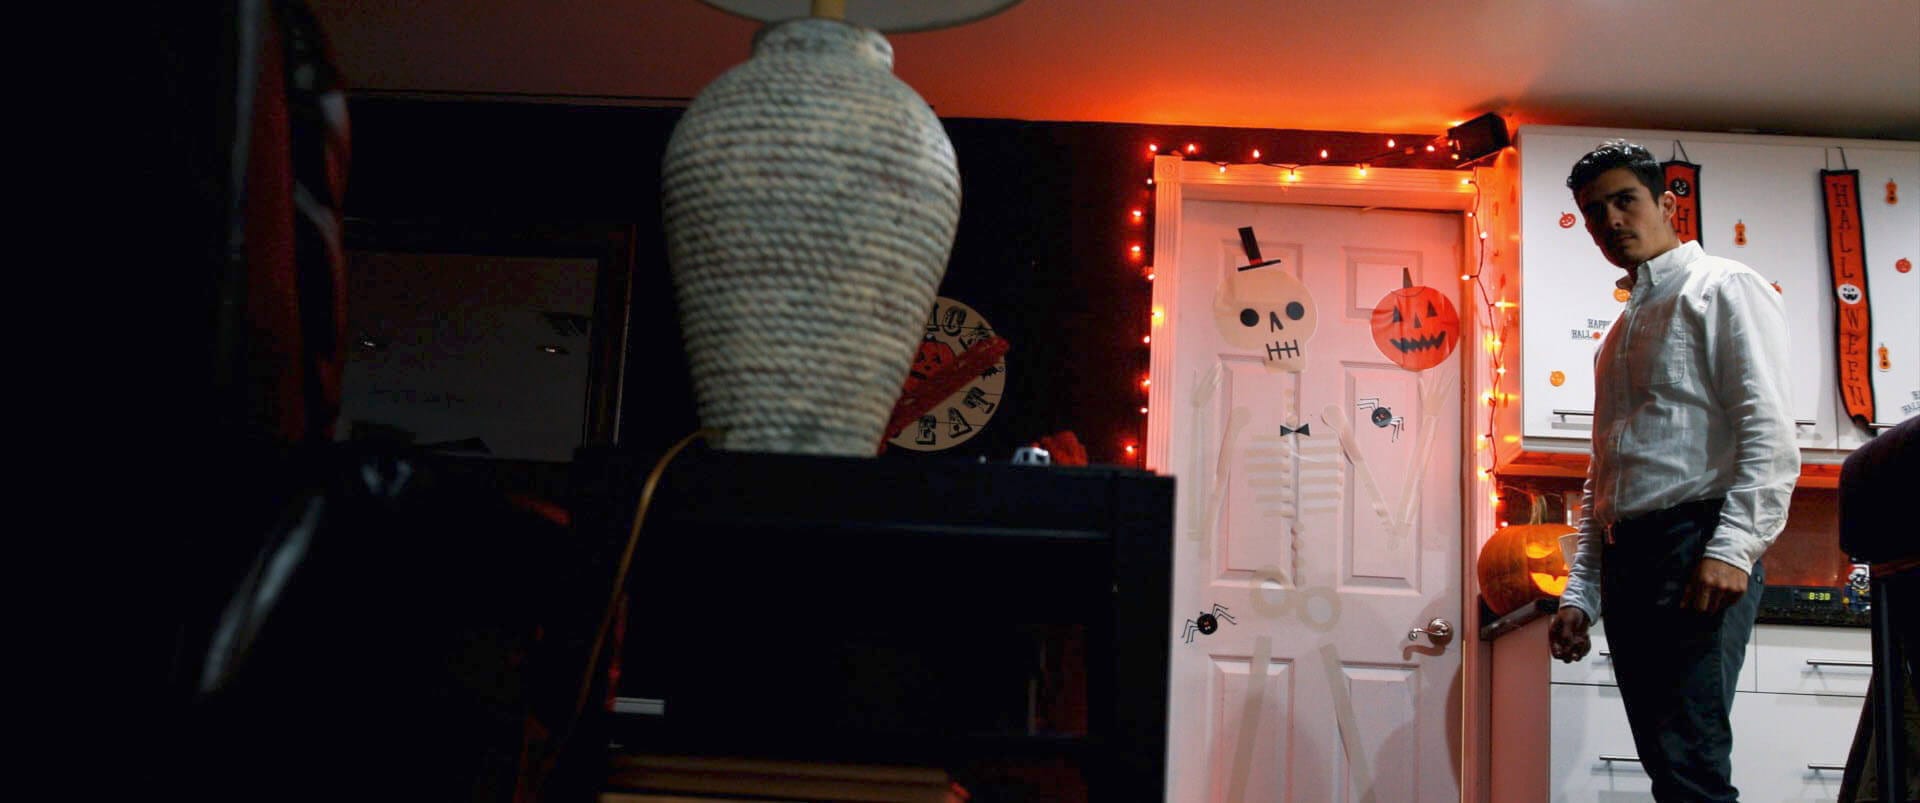 Halloween Party - Short Film Review - Indie Shorts Mag